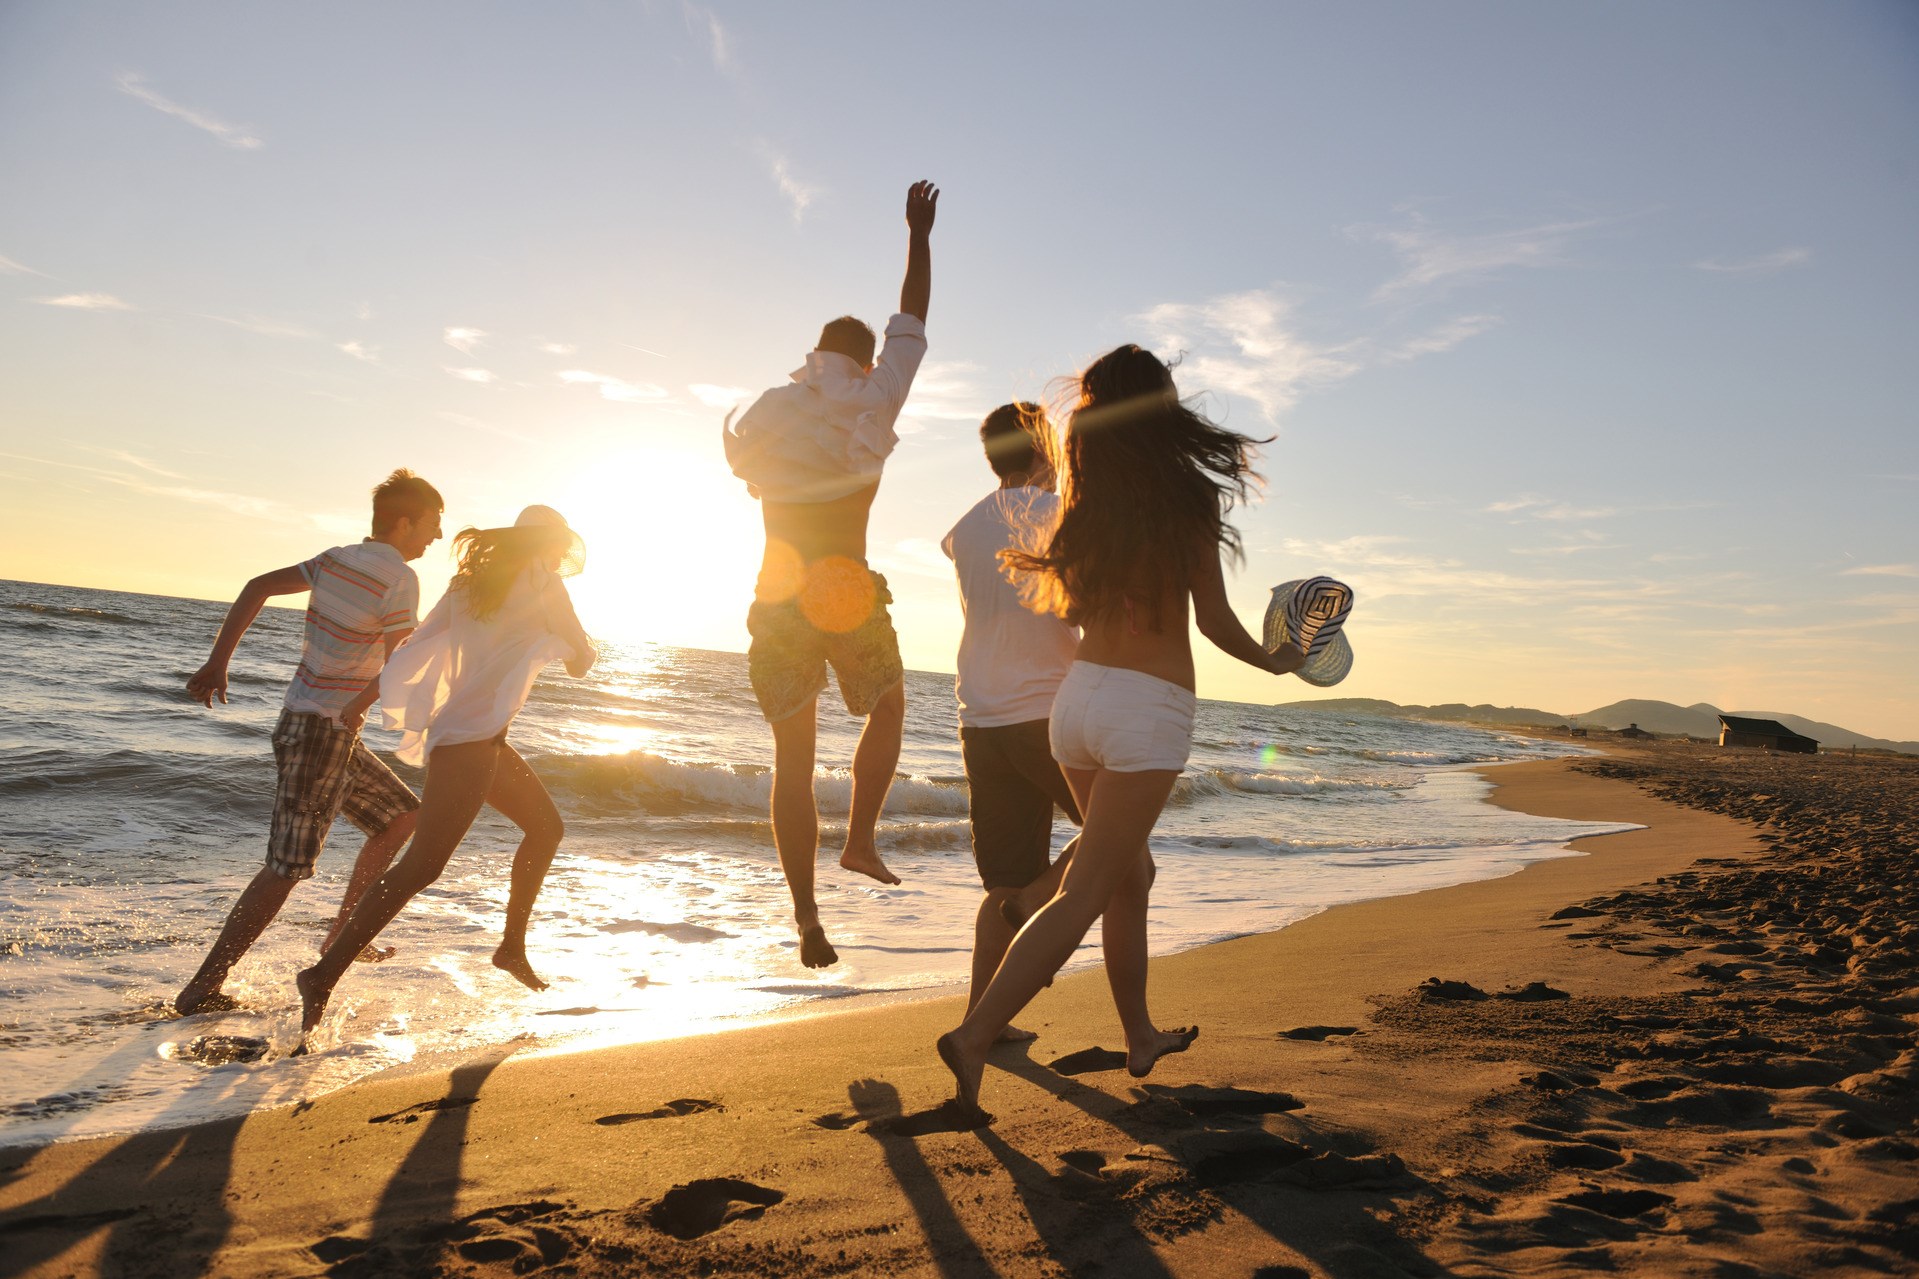 group of young people having fun running and jumping on the beach at sunset time